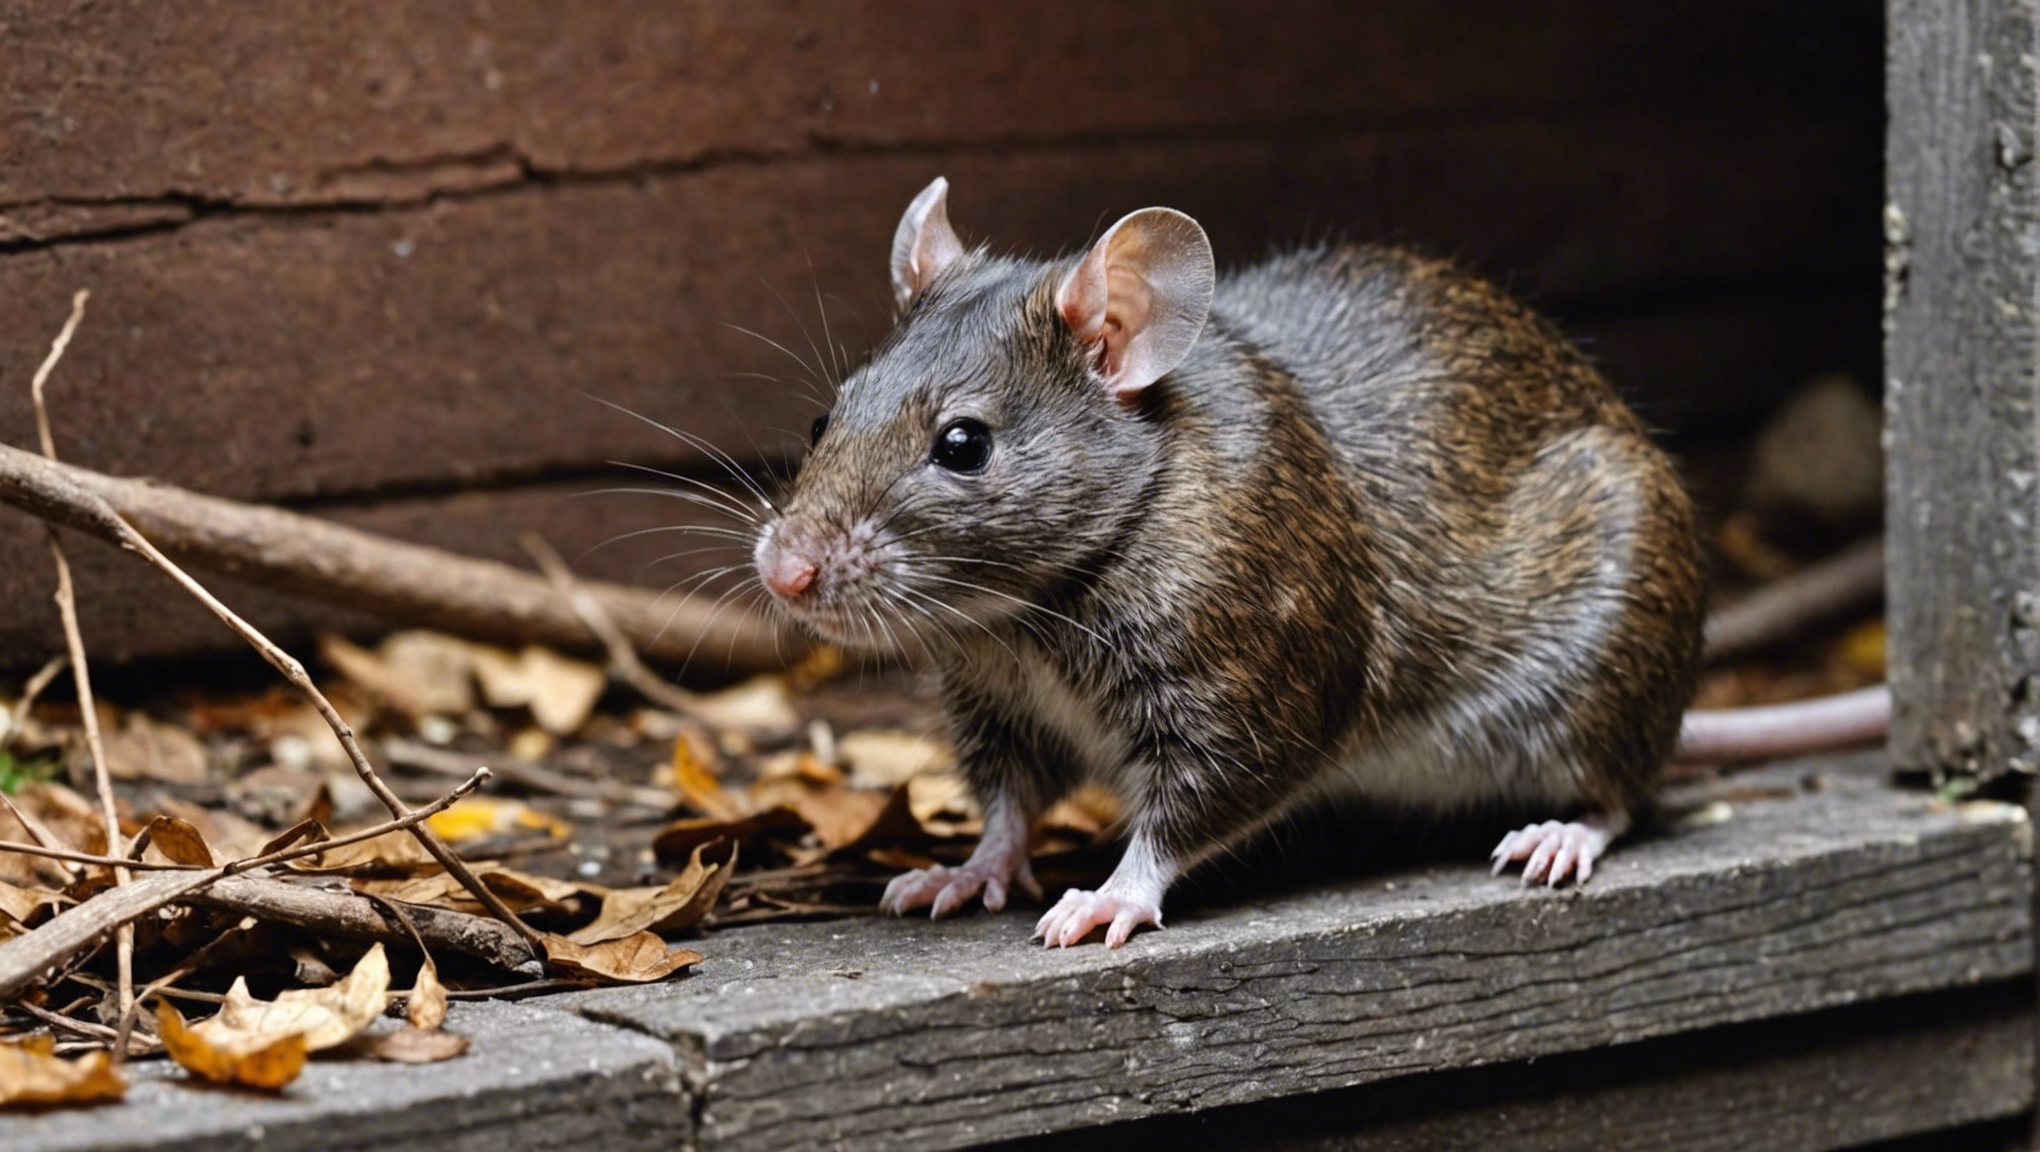 learn effective ways to seal your home and keep rats and mice out this winter with our helpful tips and techniques.